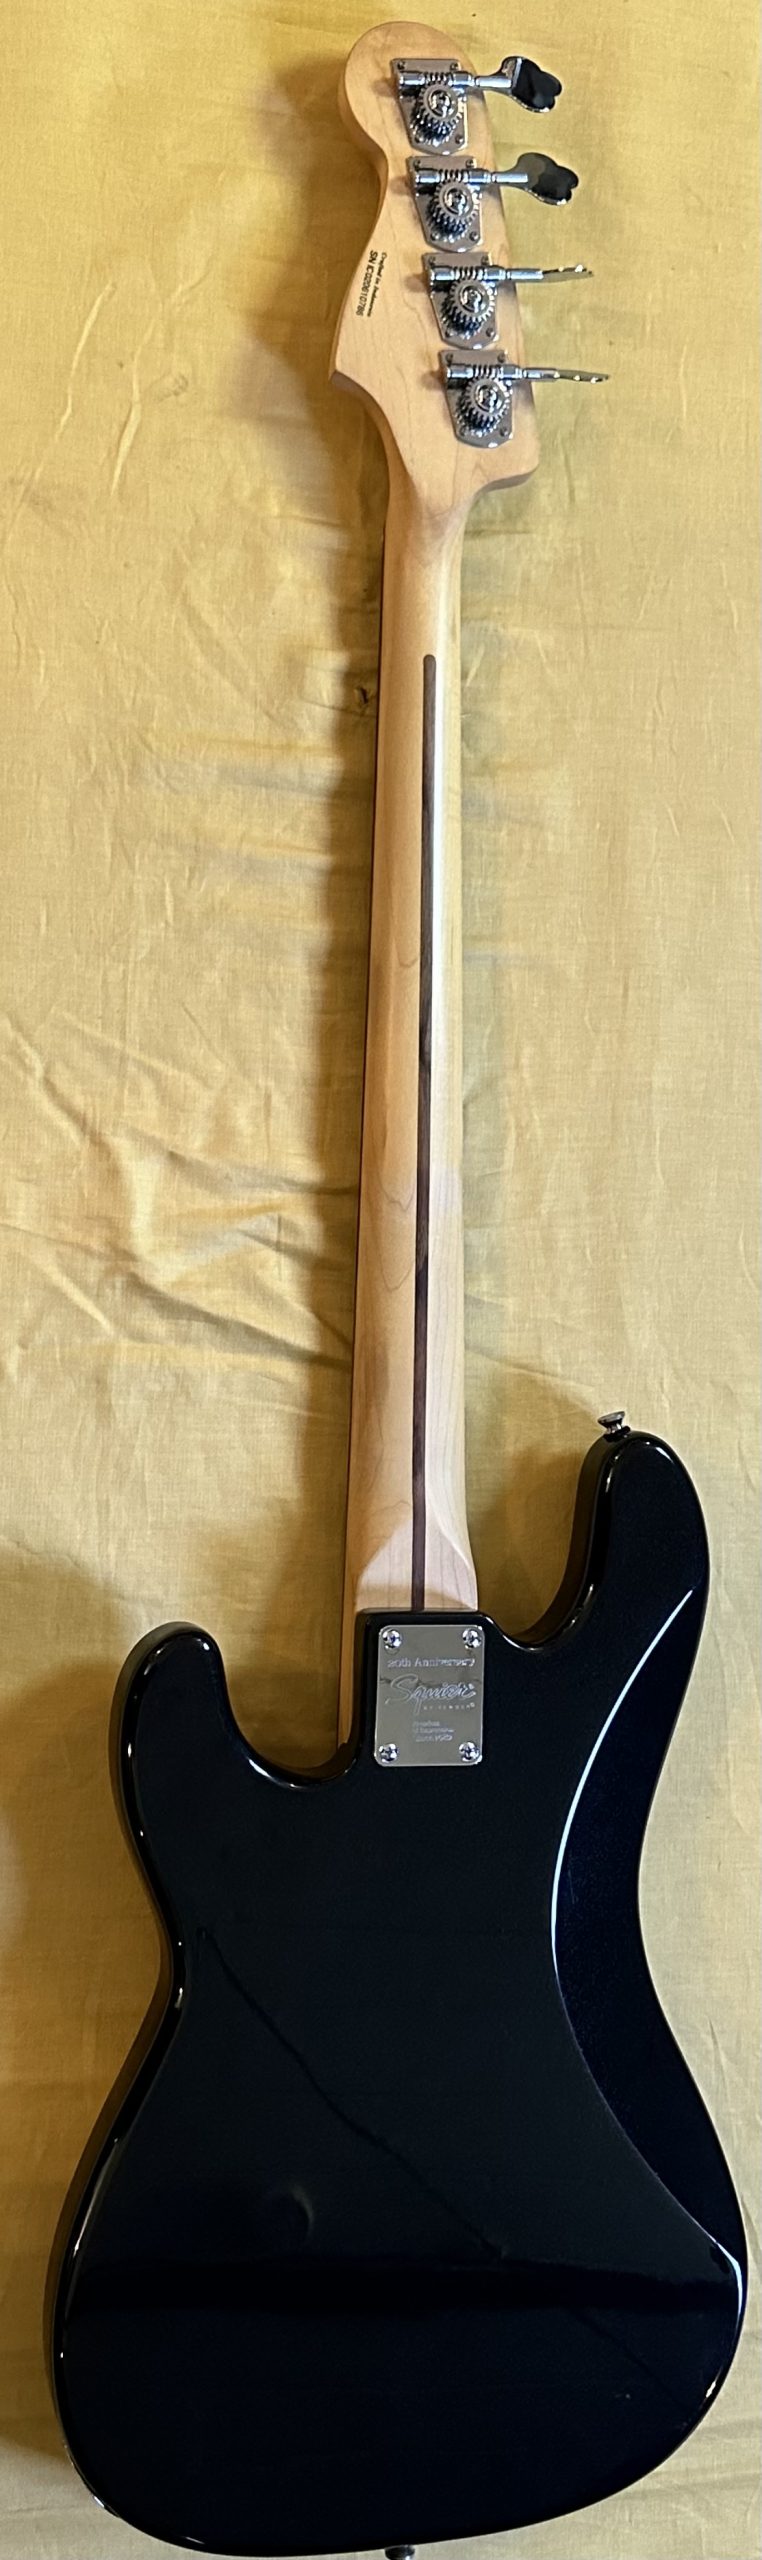 2002, Squier Precision Bass Special, Standard Series, 20th anniversary model.